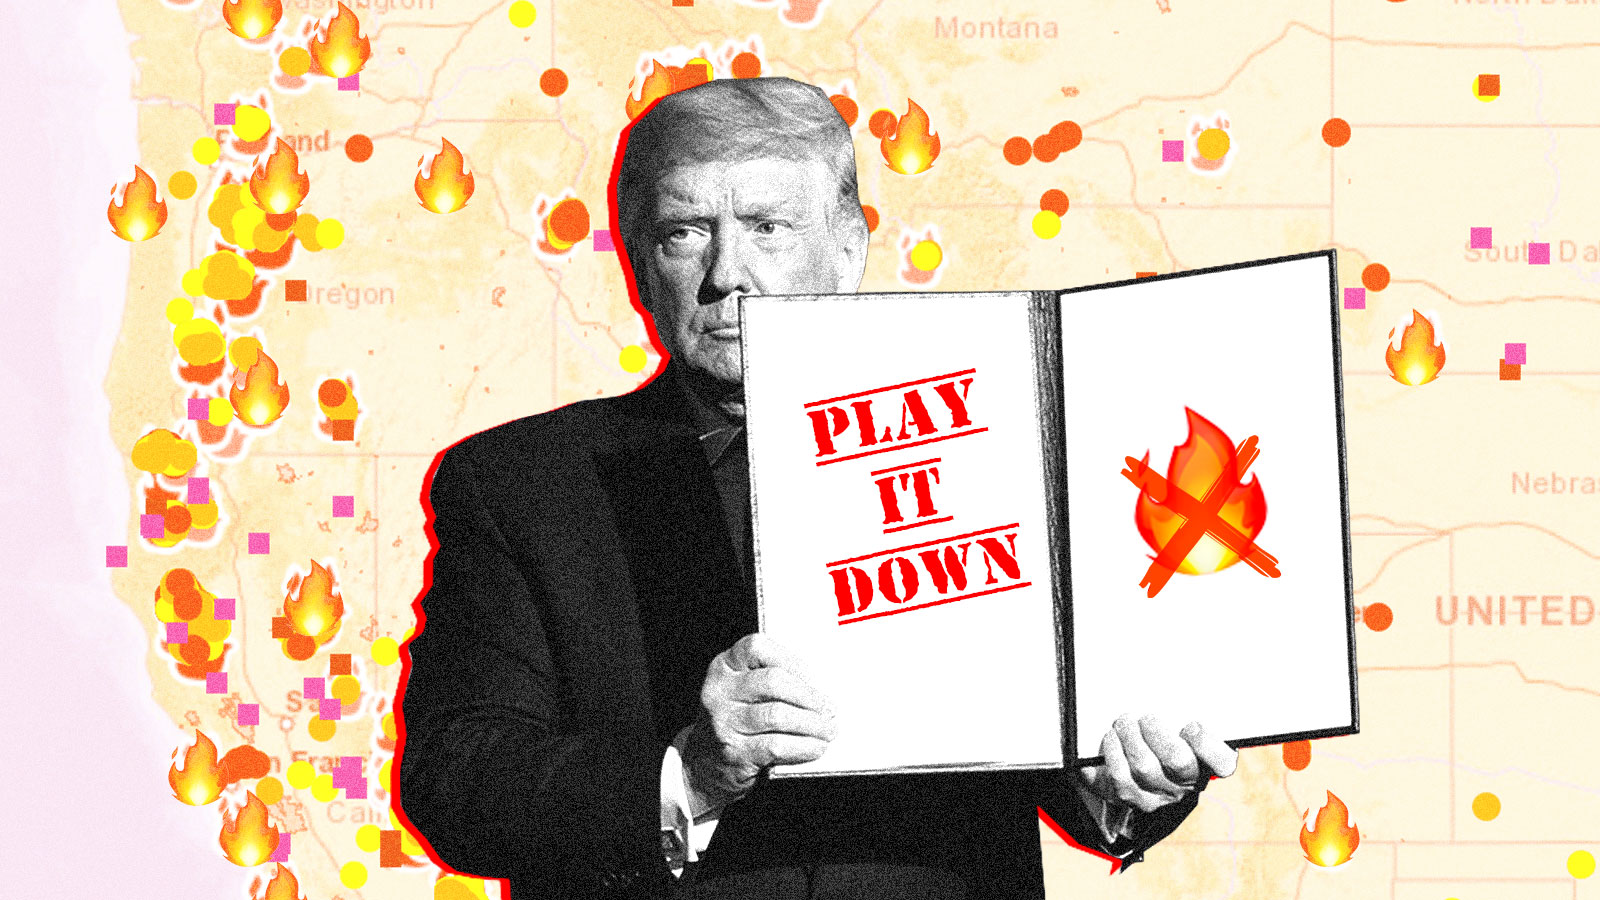 Illustration Donald Trump play it down wildfires